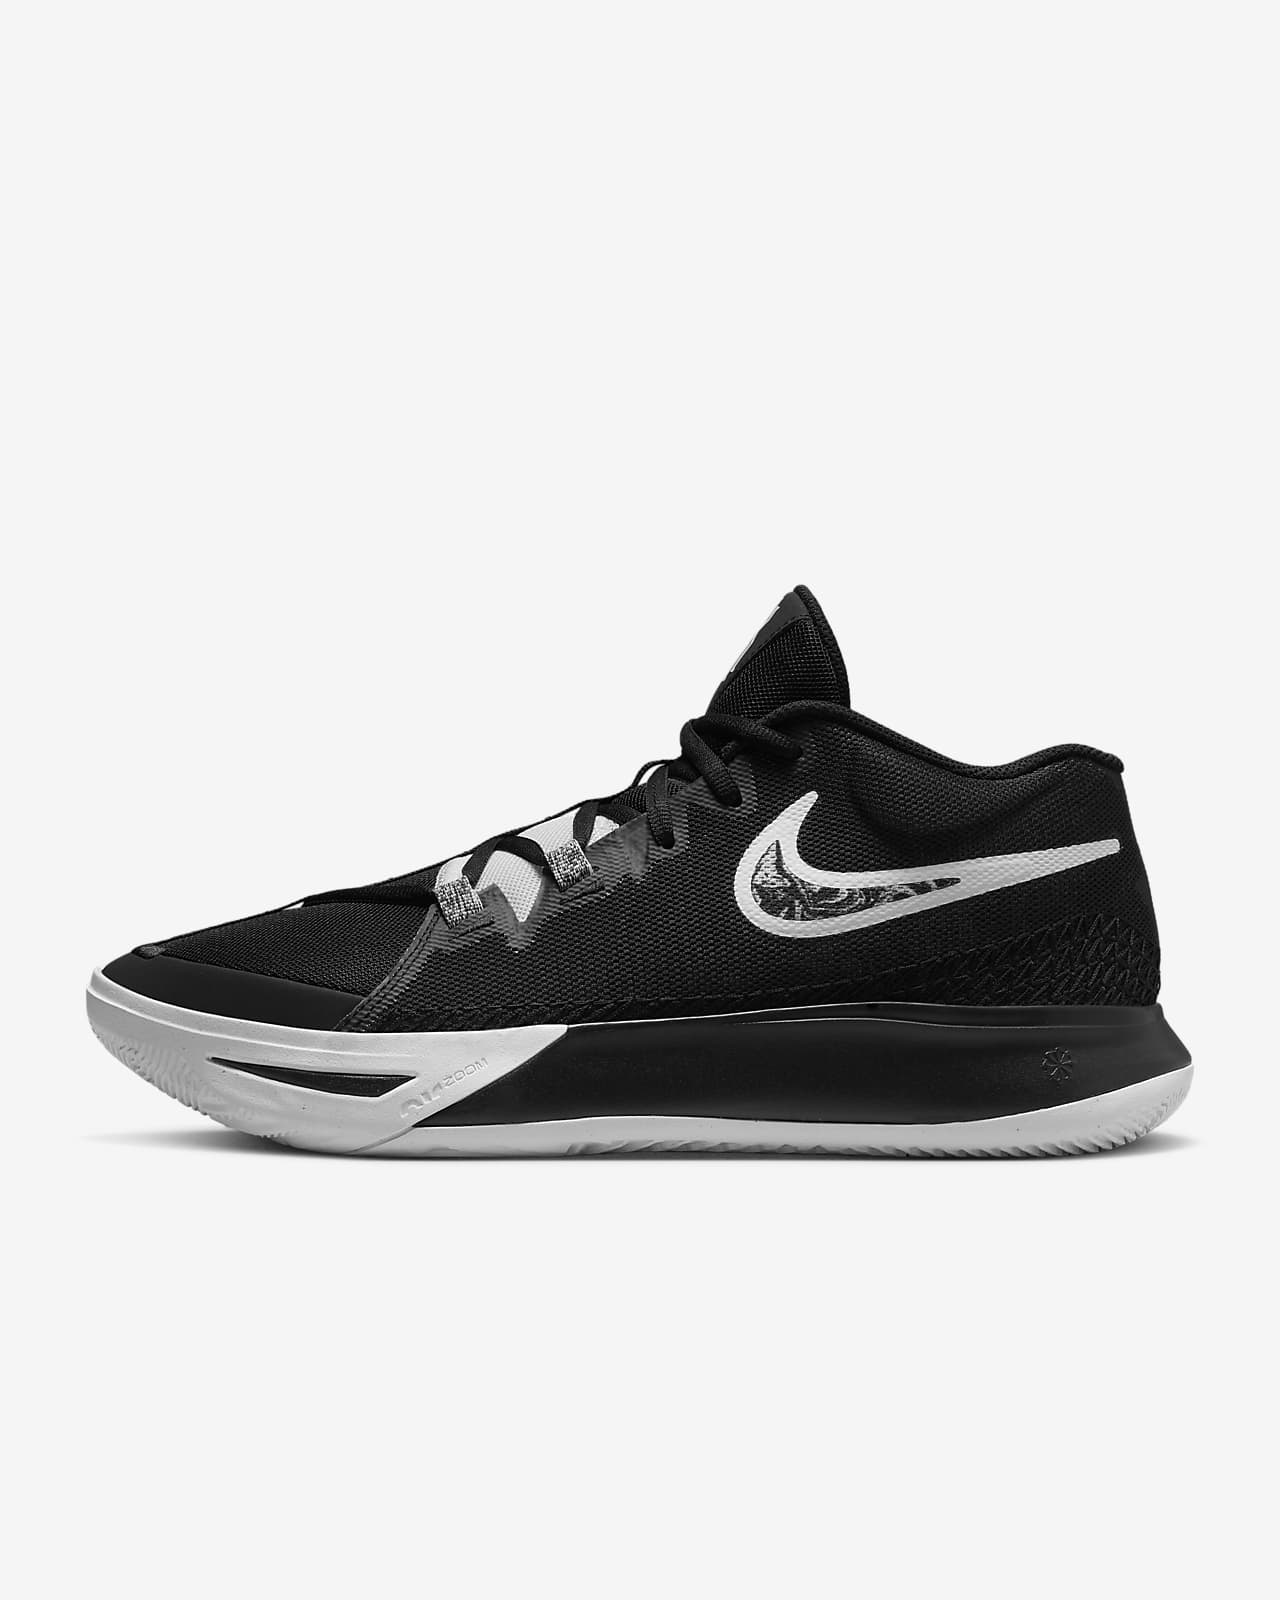 Kyrie Flytrap 6 Basketball Shoes. Nike AT